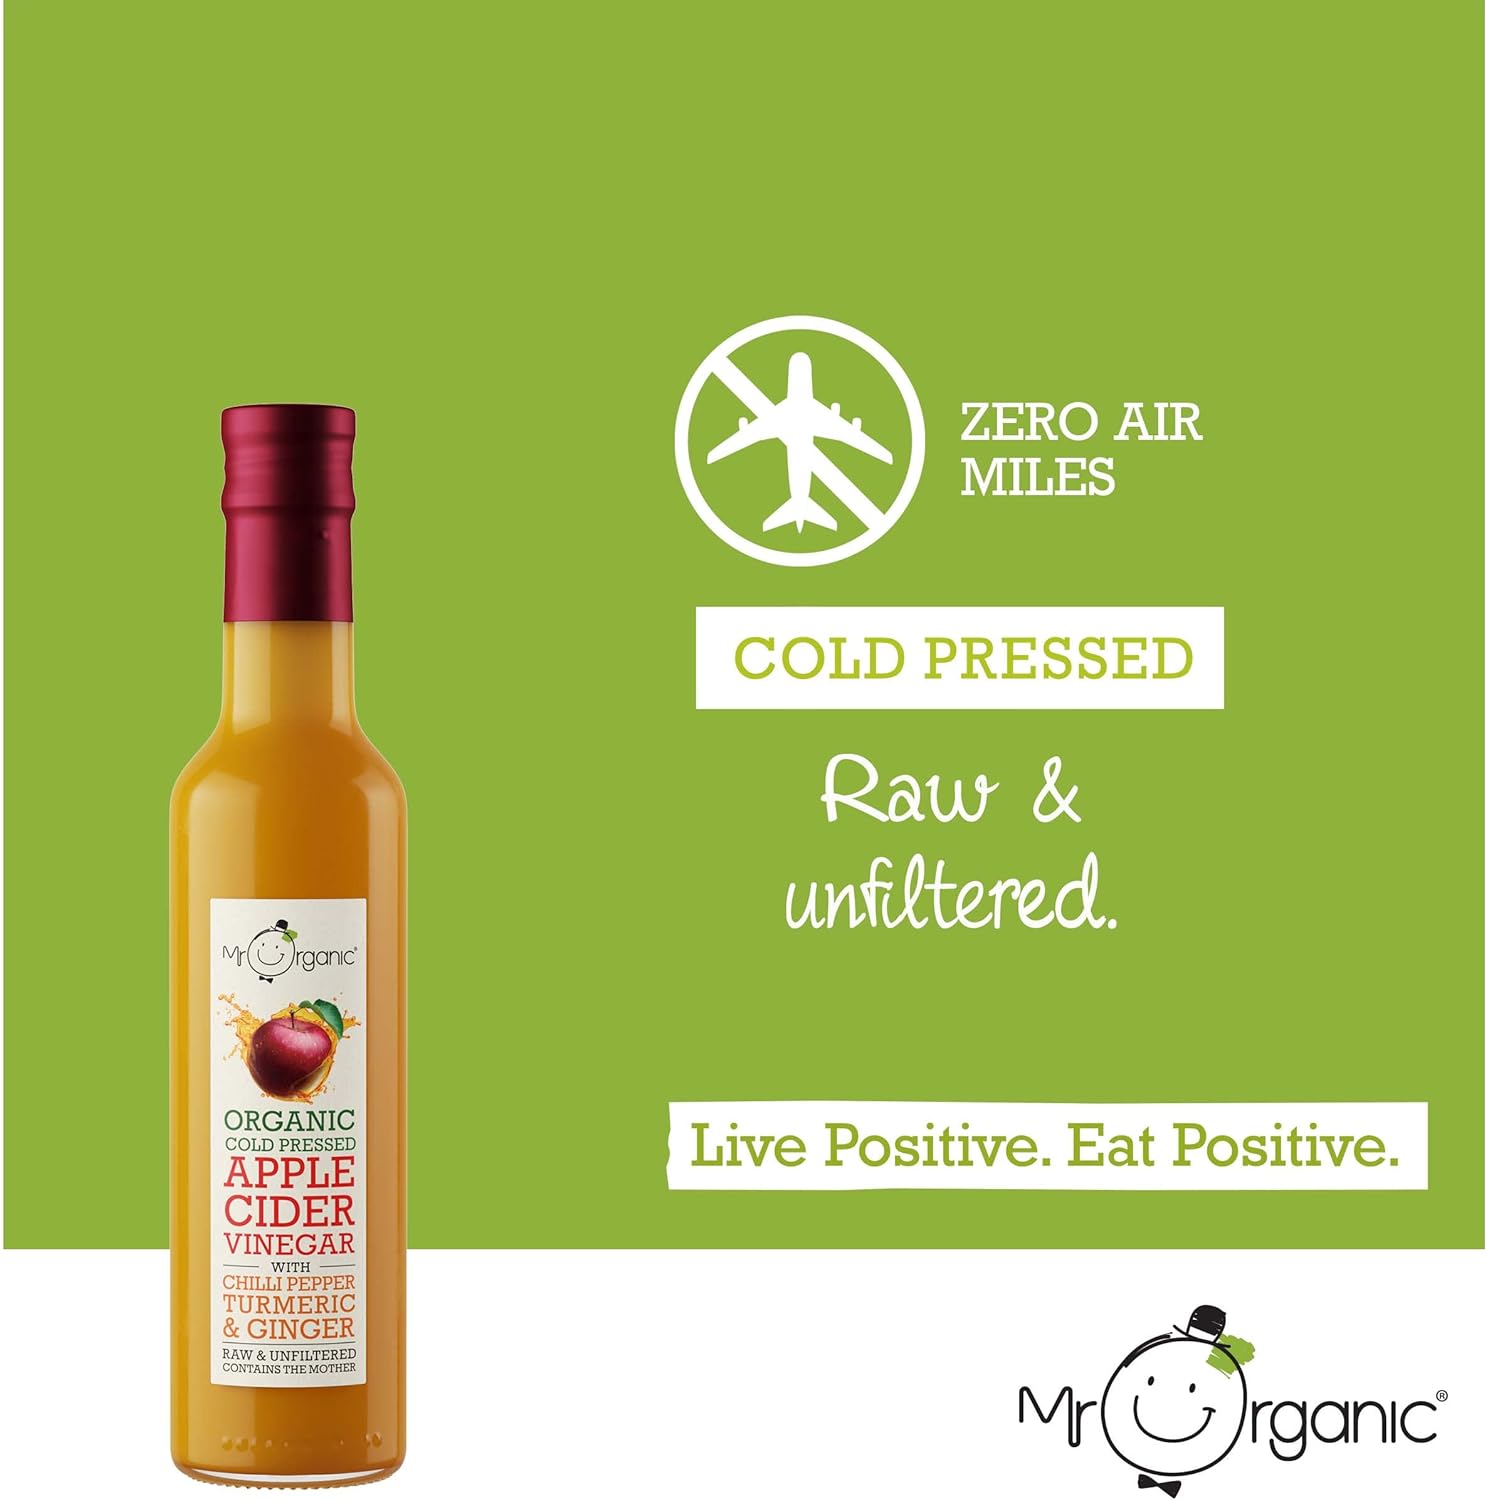 Organic Apple Cider Vinegar with Chilli, Turmeric and Ginger 250ml